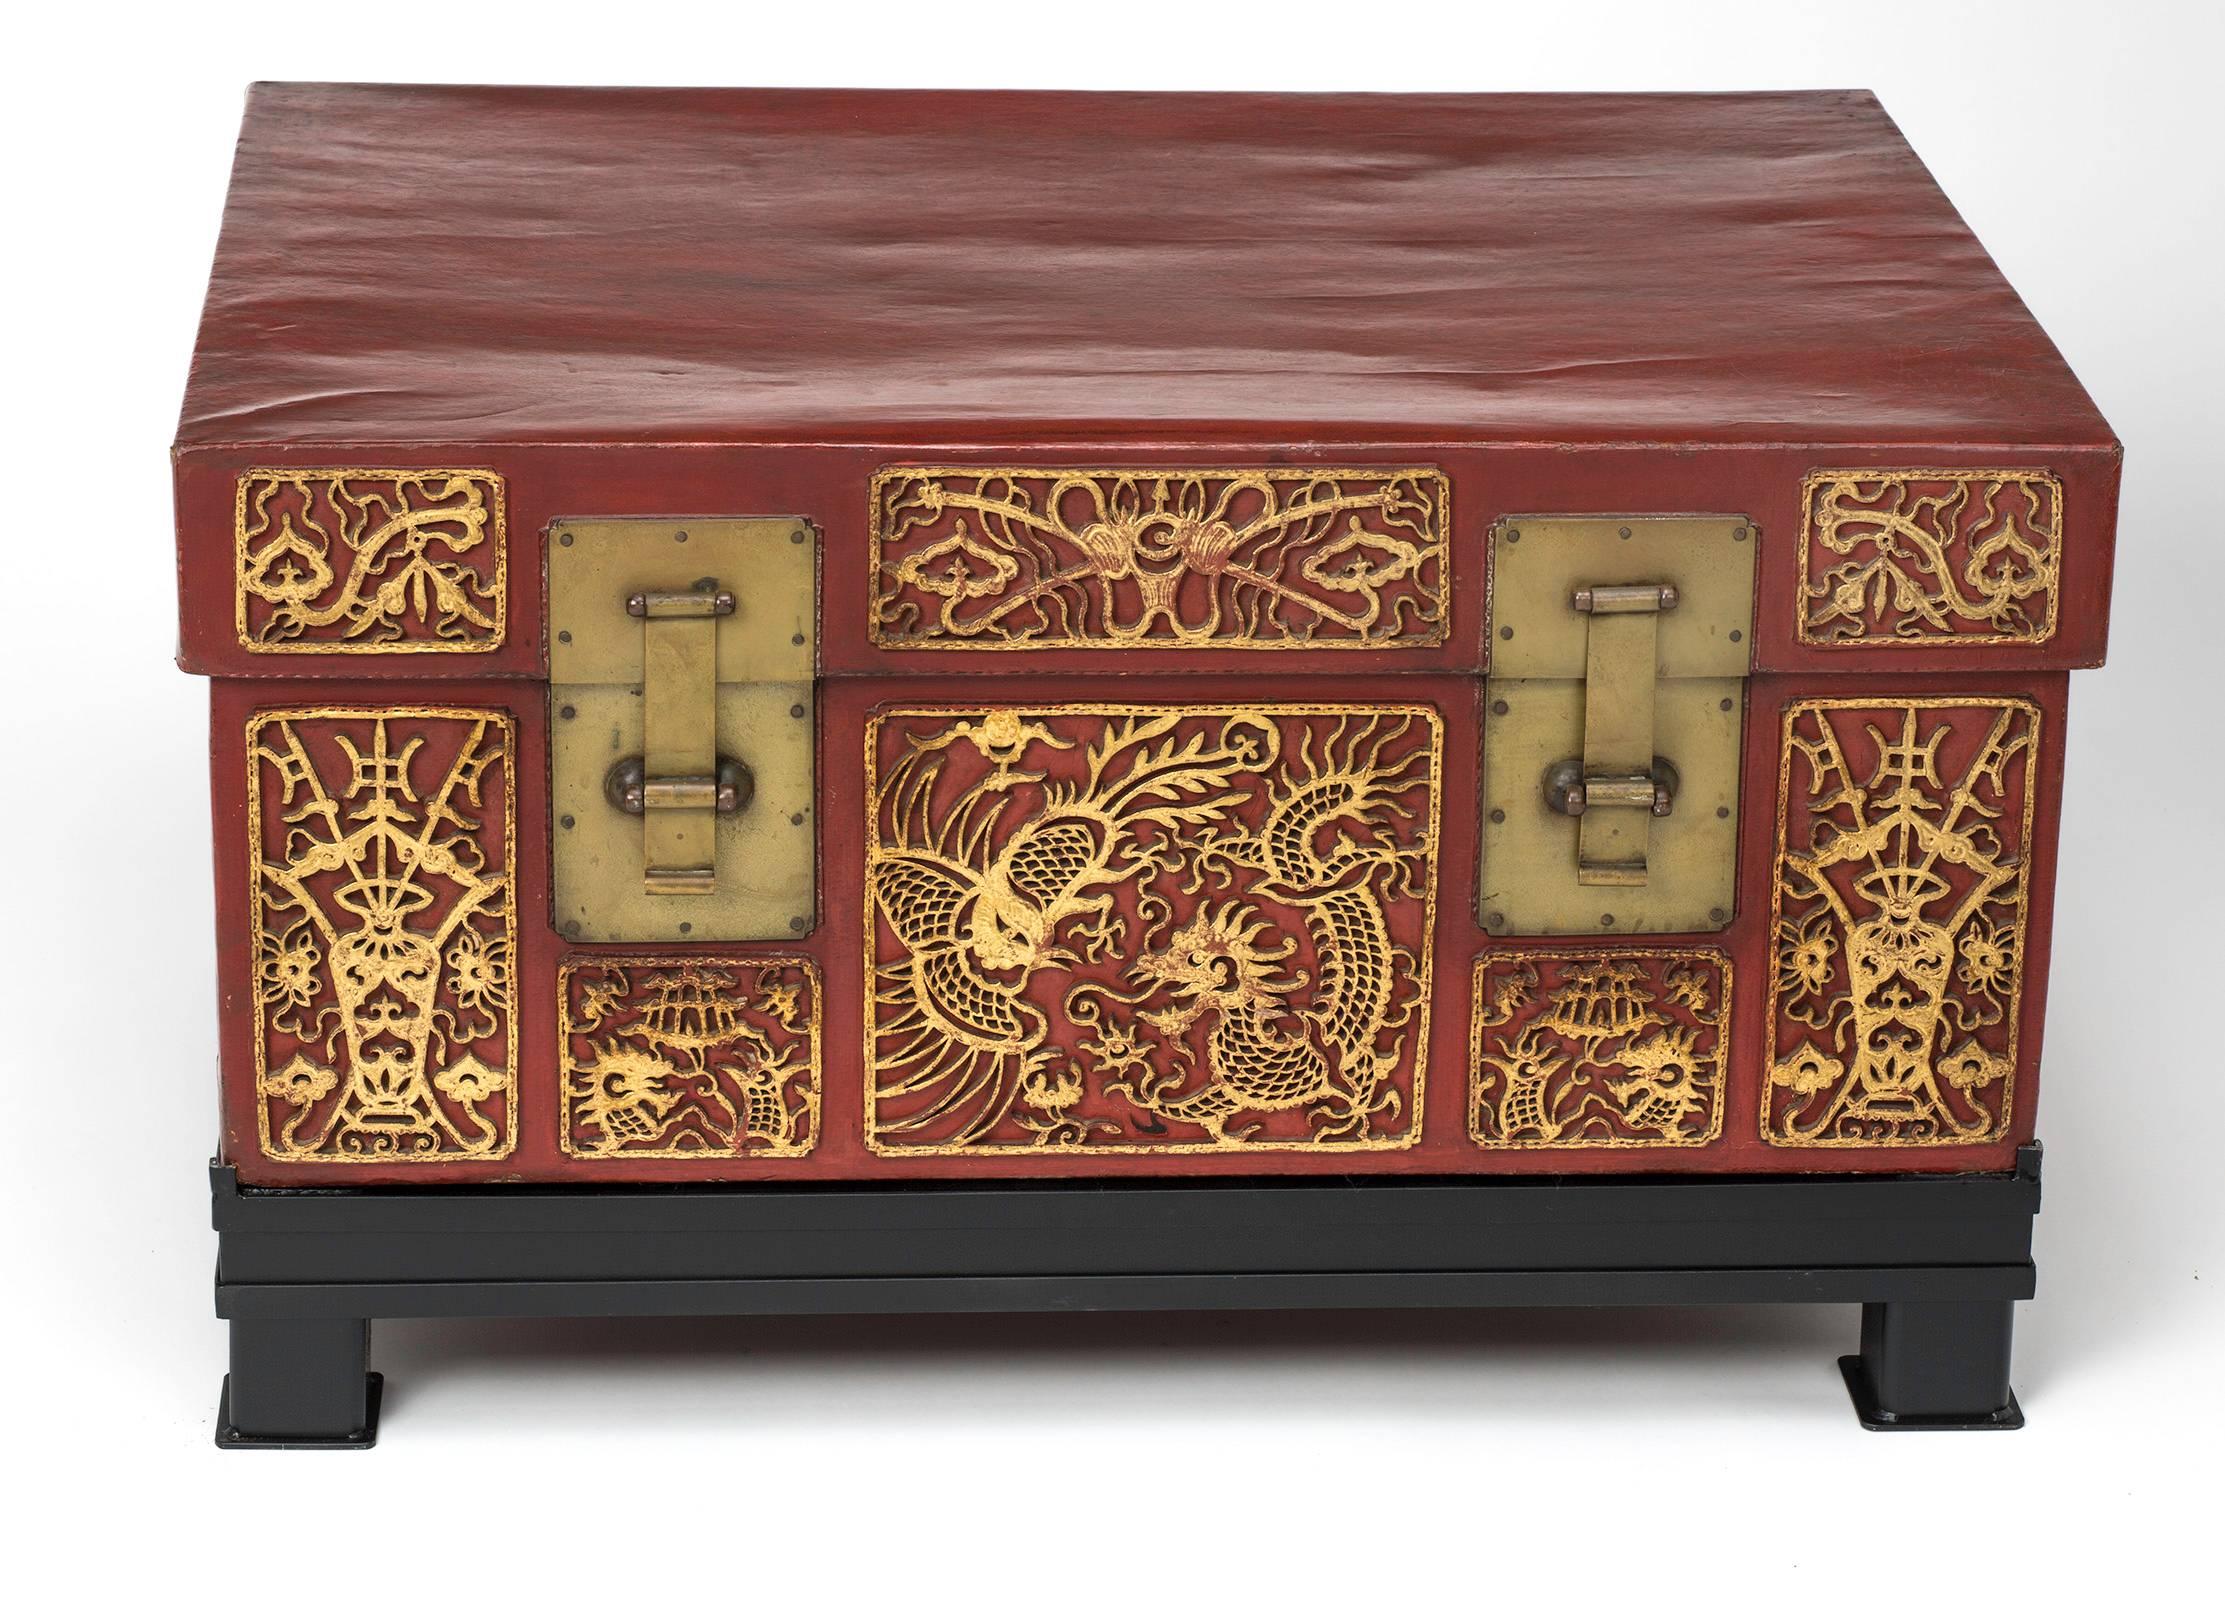 Highly decorative Chinese red leather trunk with carved leather gilt overlay.  Circa 1930s.
It sits on a custom-made iron base. With glass top, it can be useful  as a coffee table or side table.  Glass top is not shown, but included if desired.
